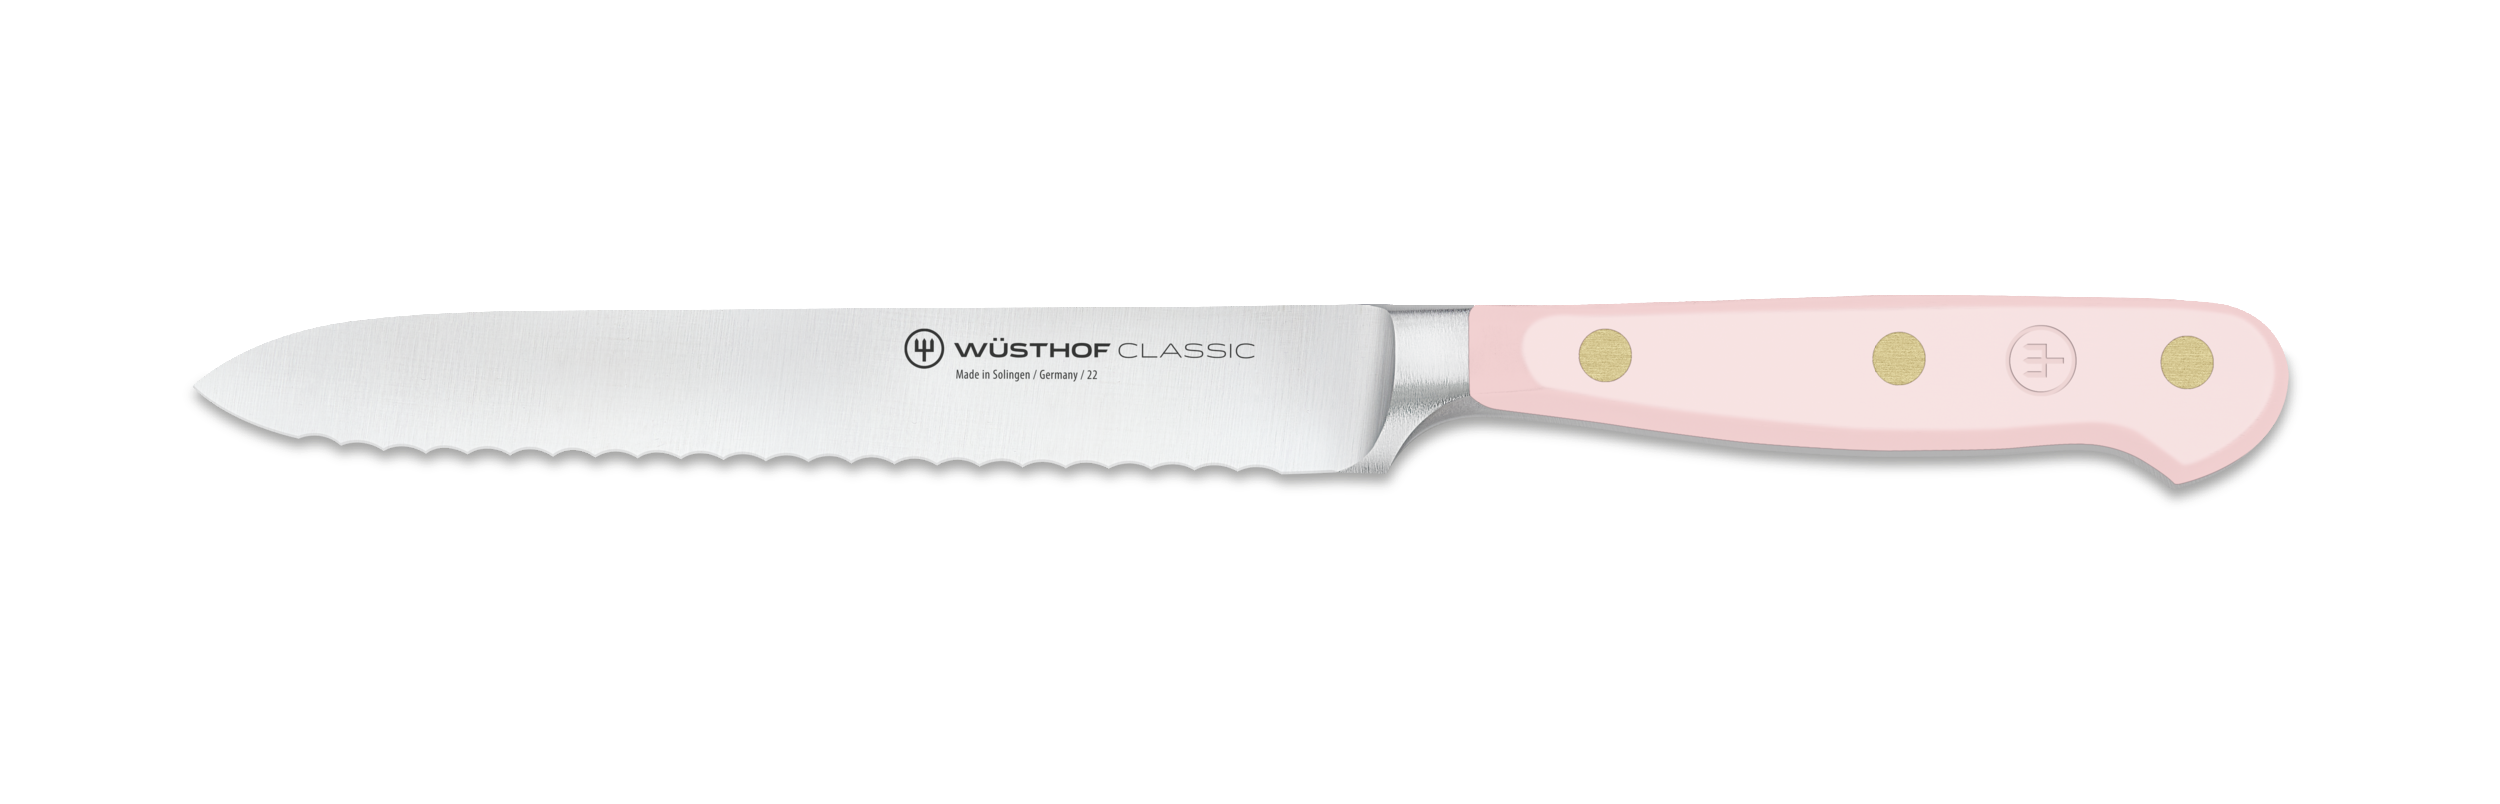 Wüsthof Classic 5 Serrated Utility Knife + Reviews